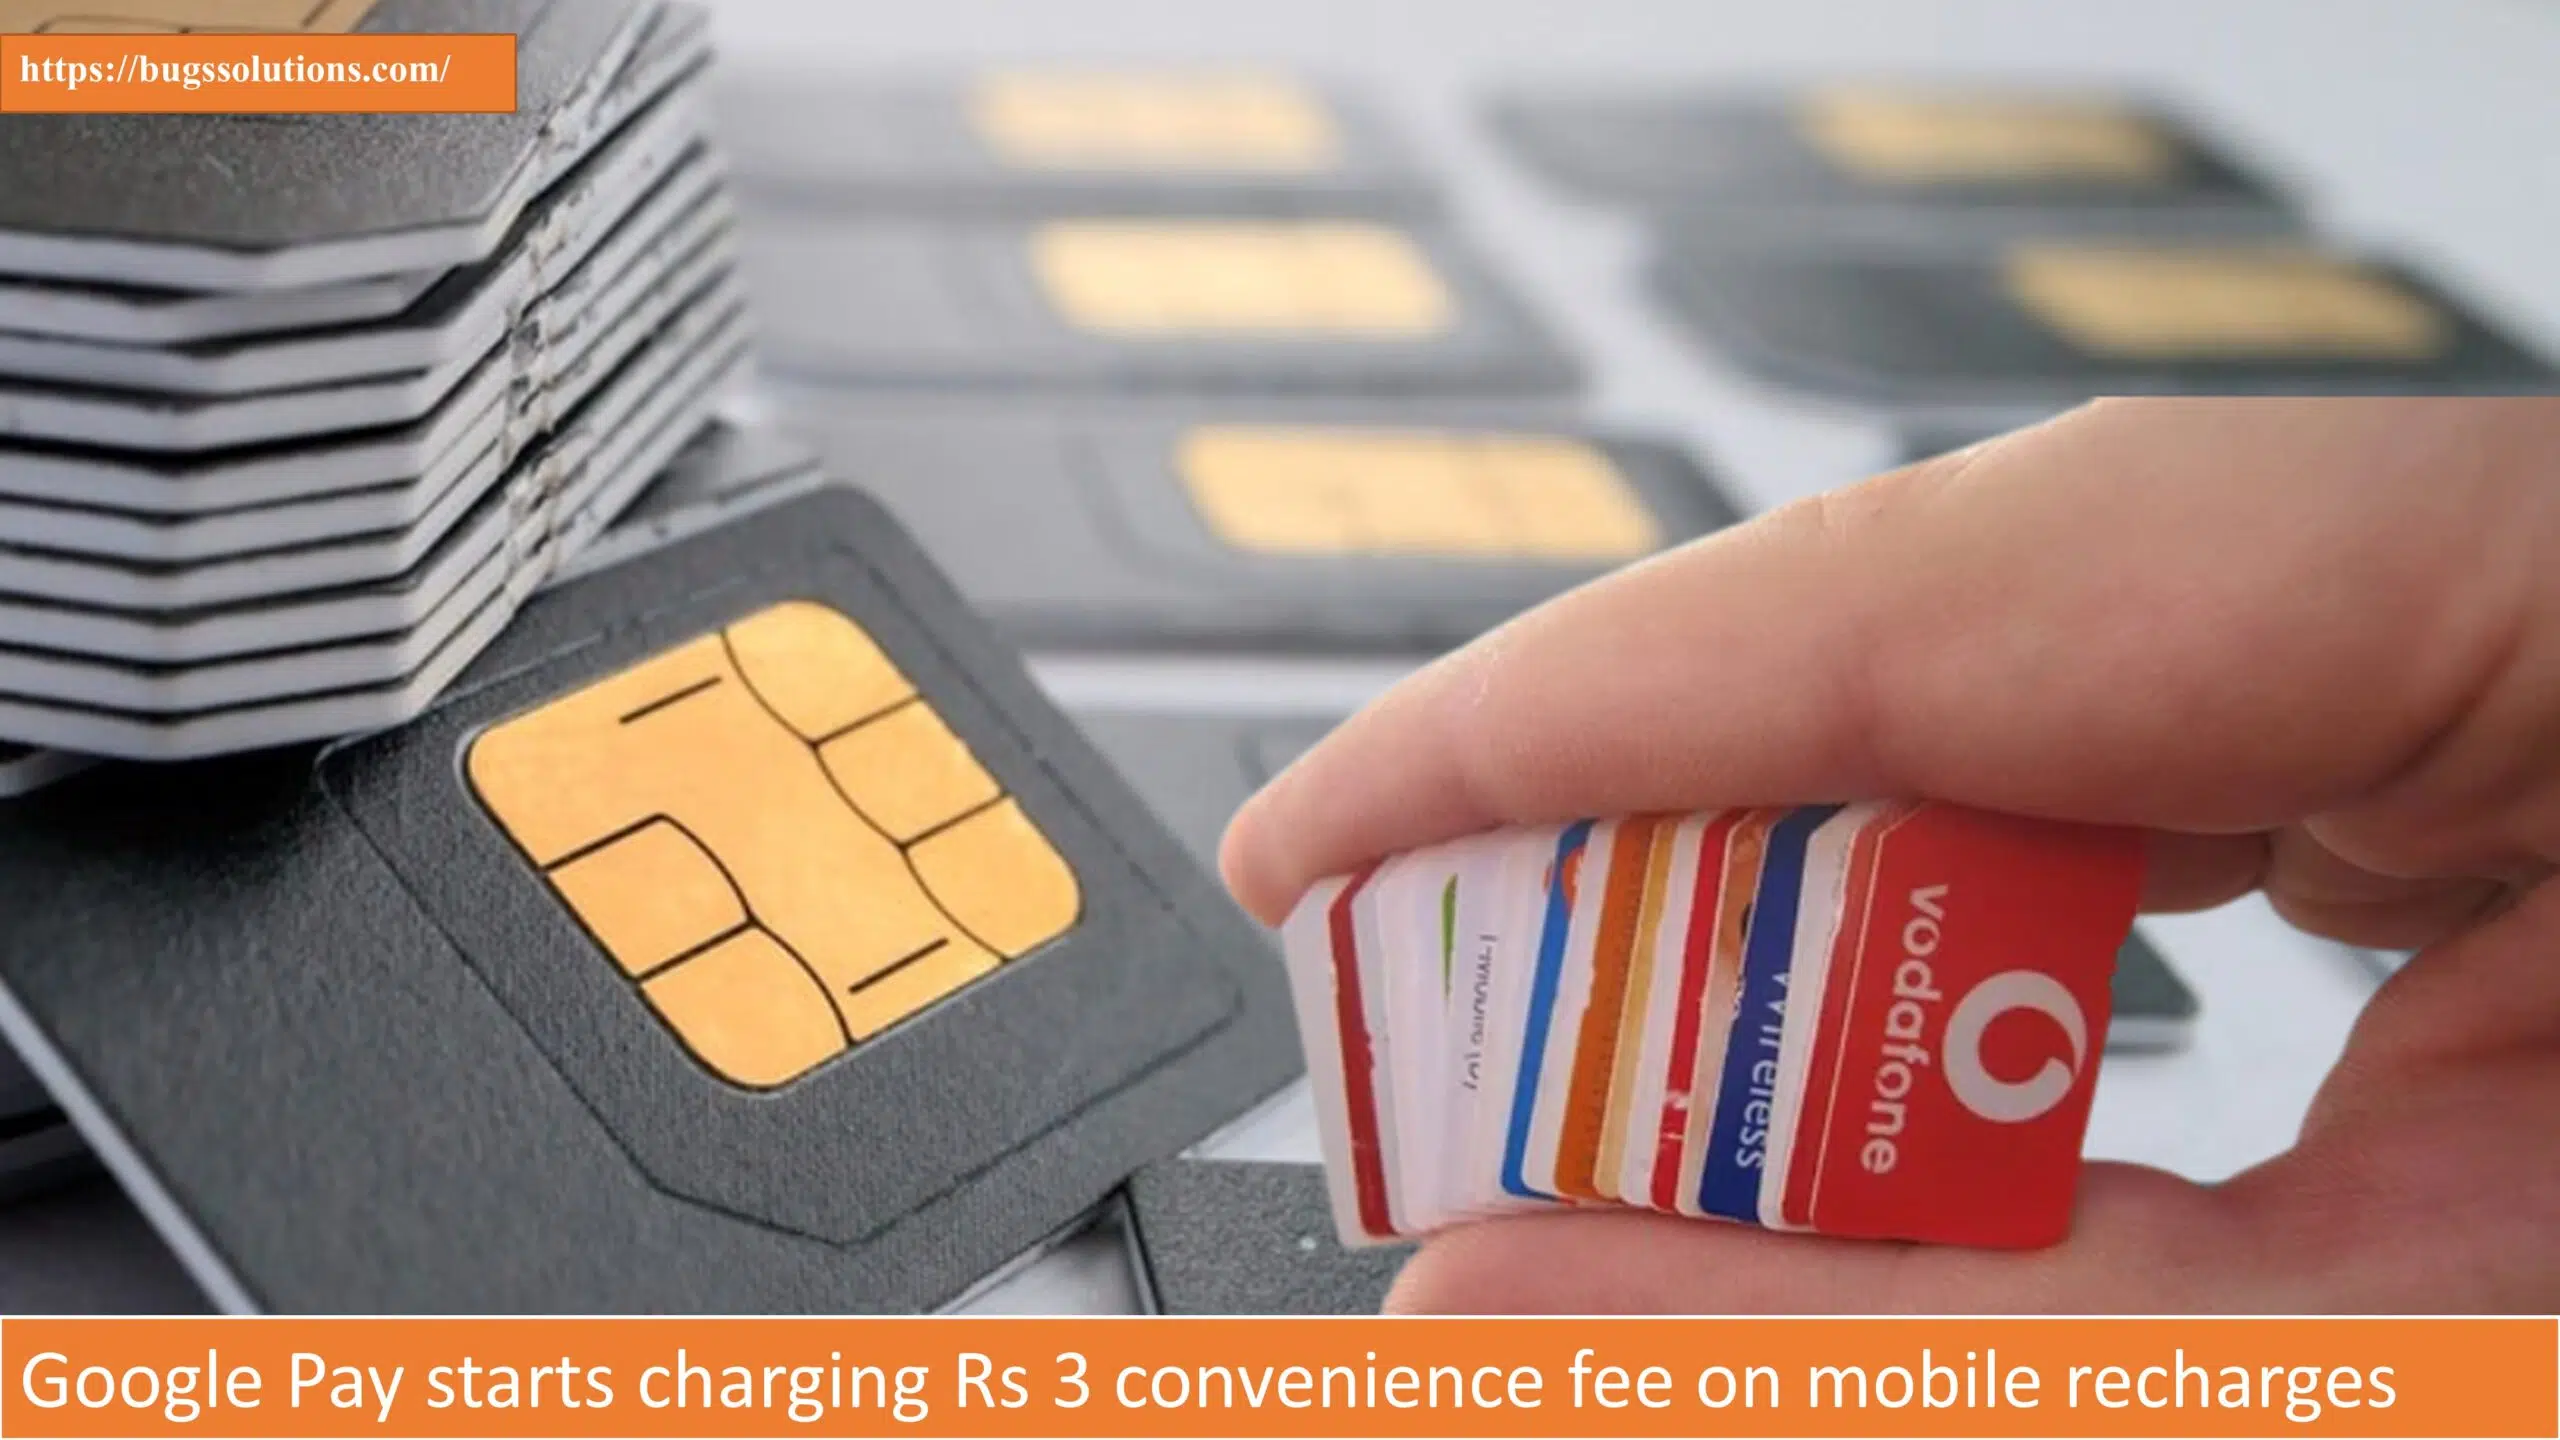 Google Pay starts charging Rs 3 convenience fee on mobile recharges